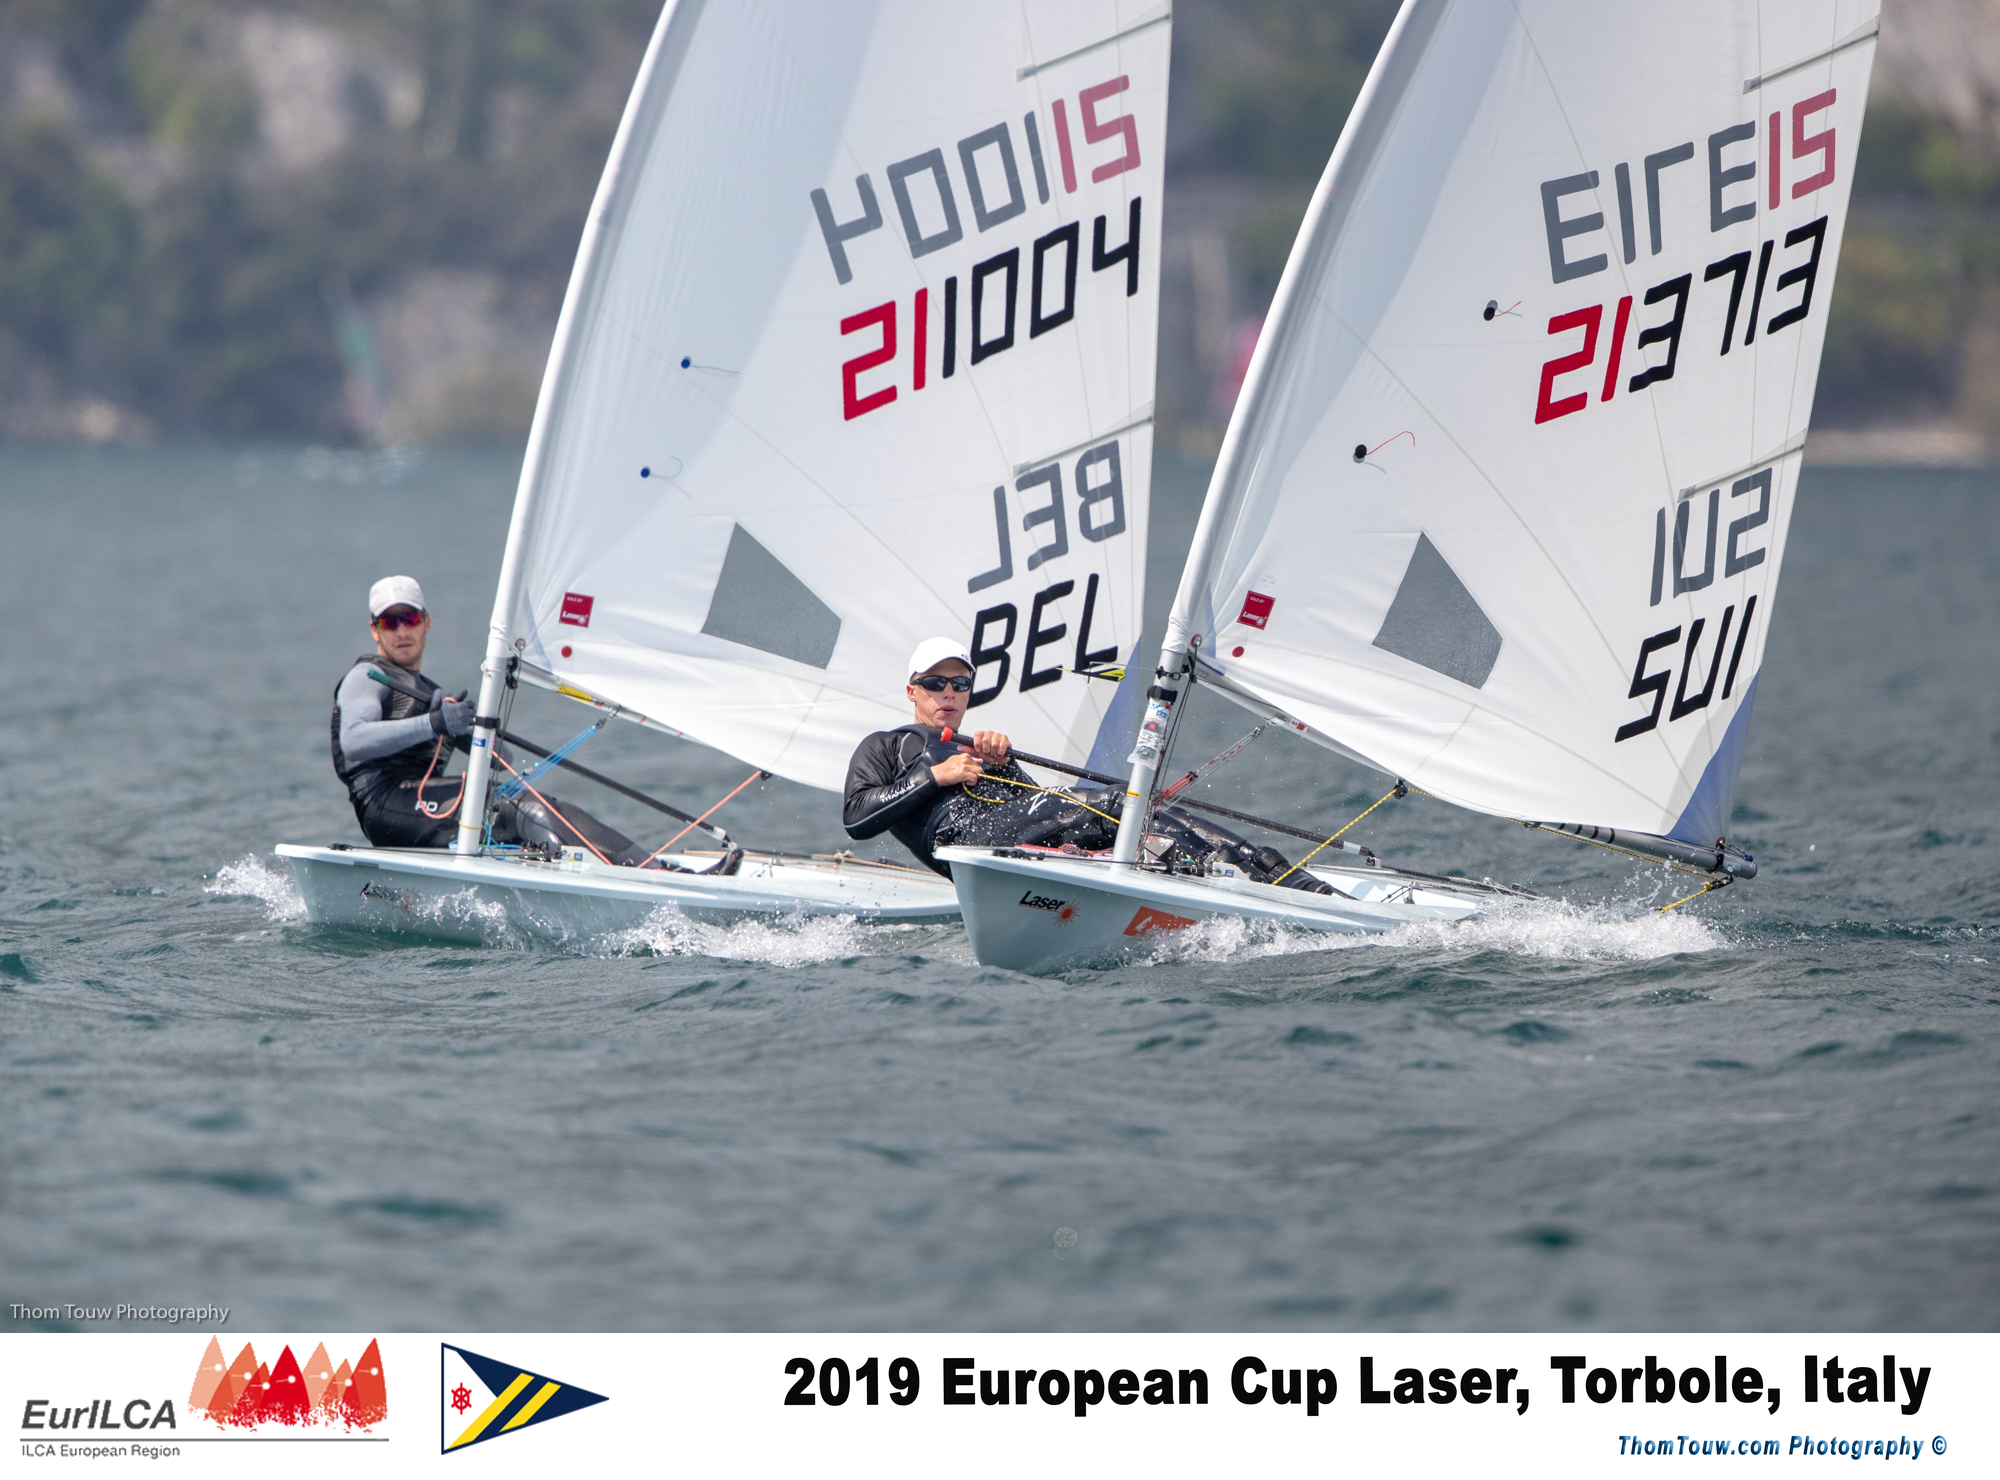  Laser  Europacup 2019  Act 4  Torbole ITA  Day 2.the Swiss